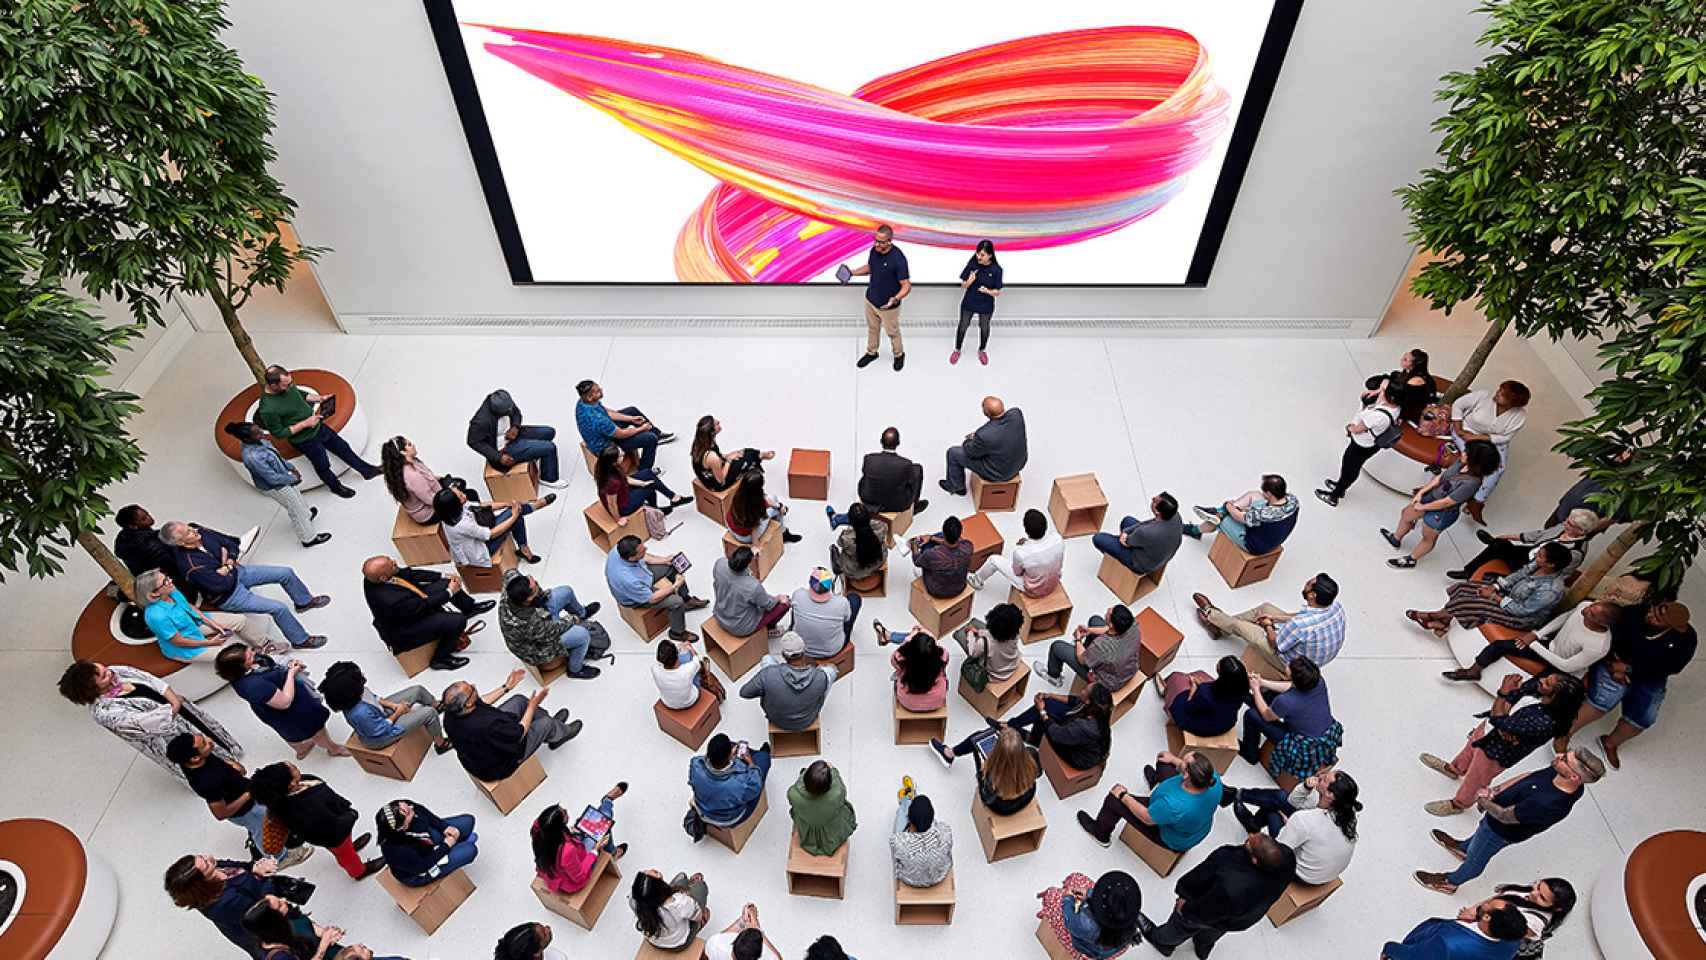 Charla de Today at Apple